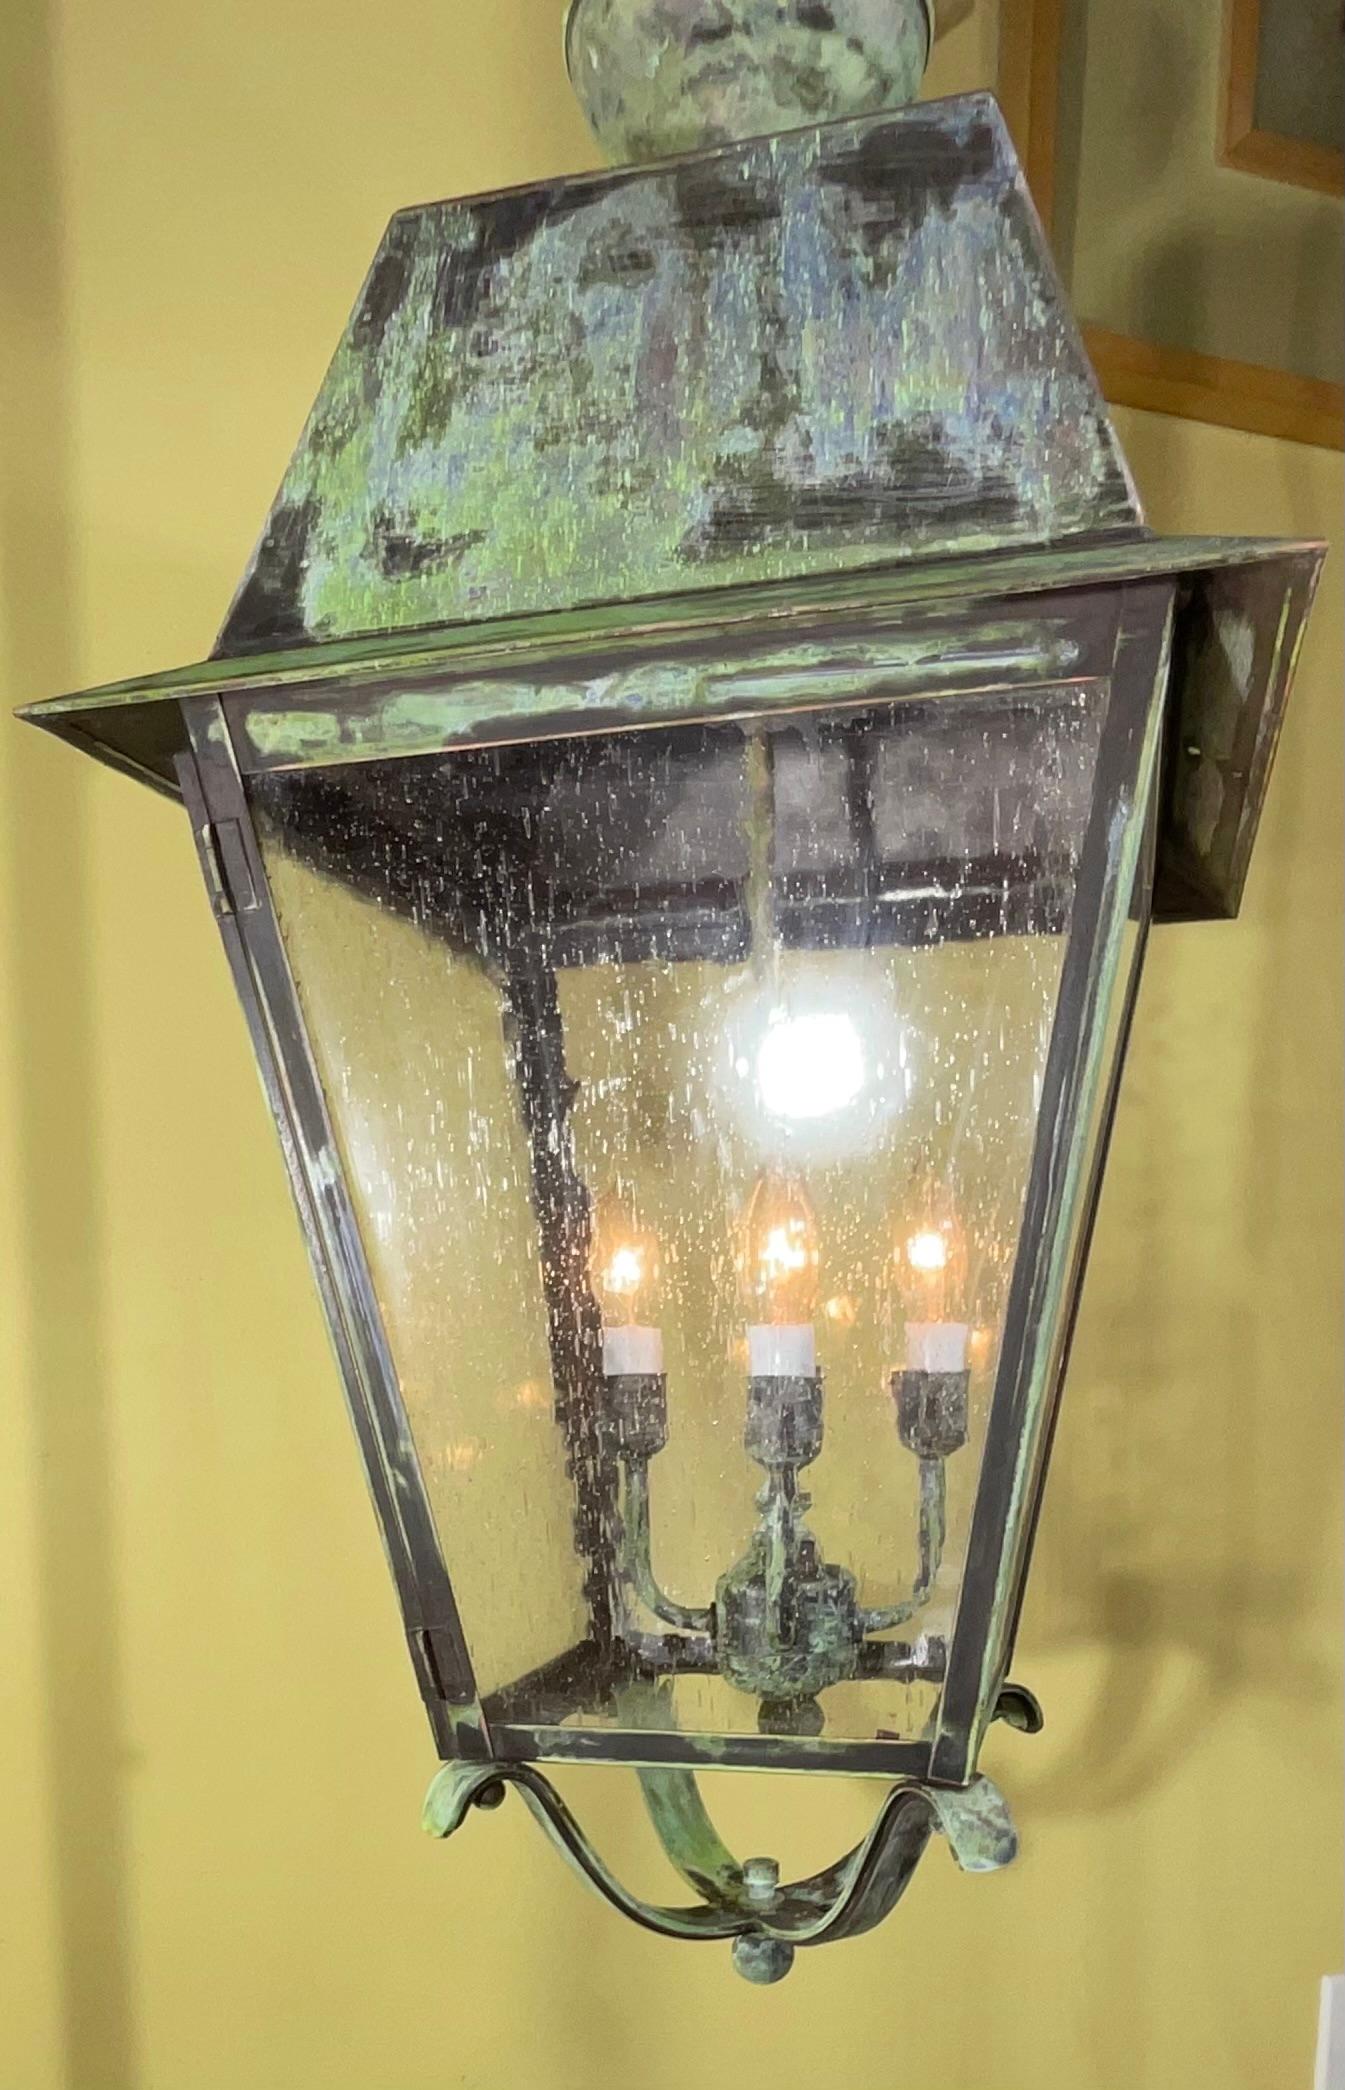 Elegant large hanging lantern handcrafted from solid brass, seeded glass ,
With four 40/watt lights, suitable for hanging in wet location, Ready to use.
canopy and chain included.
